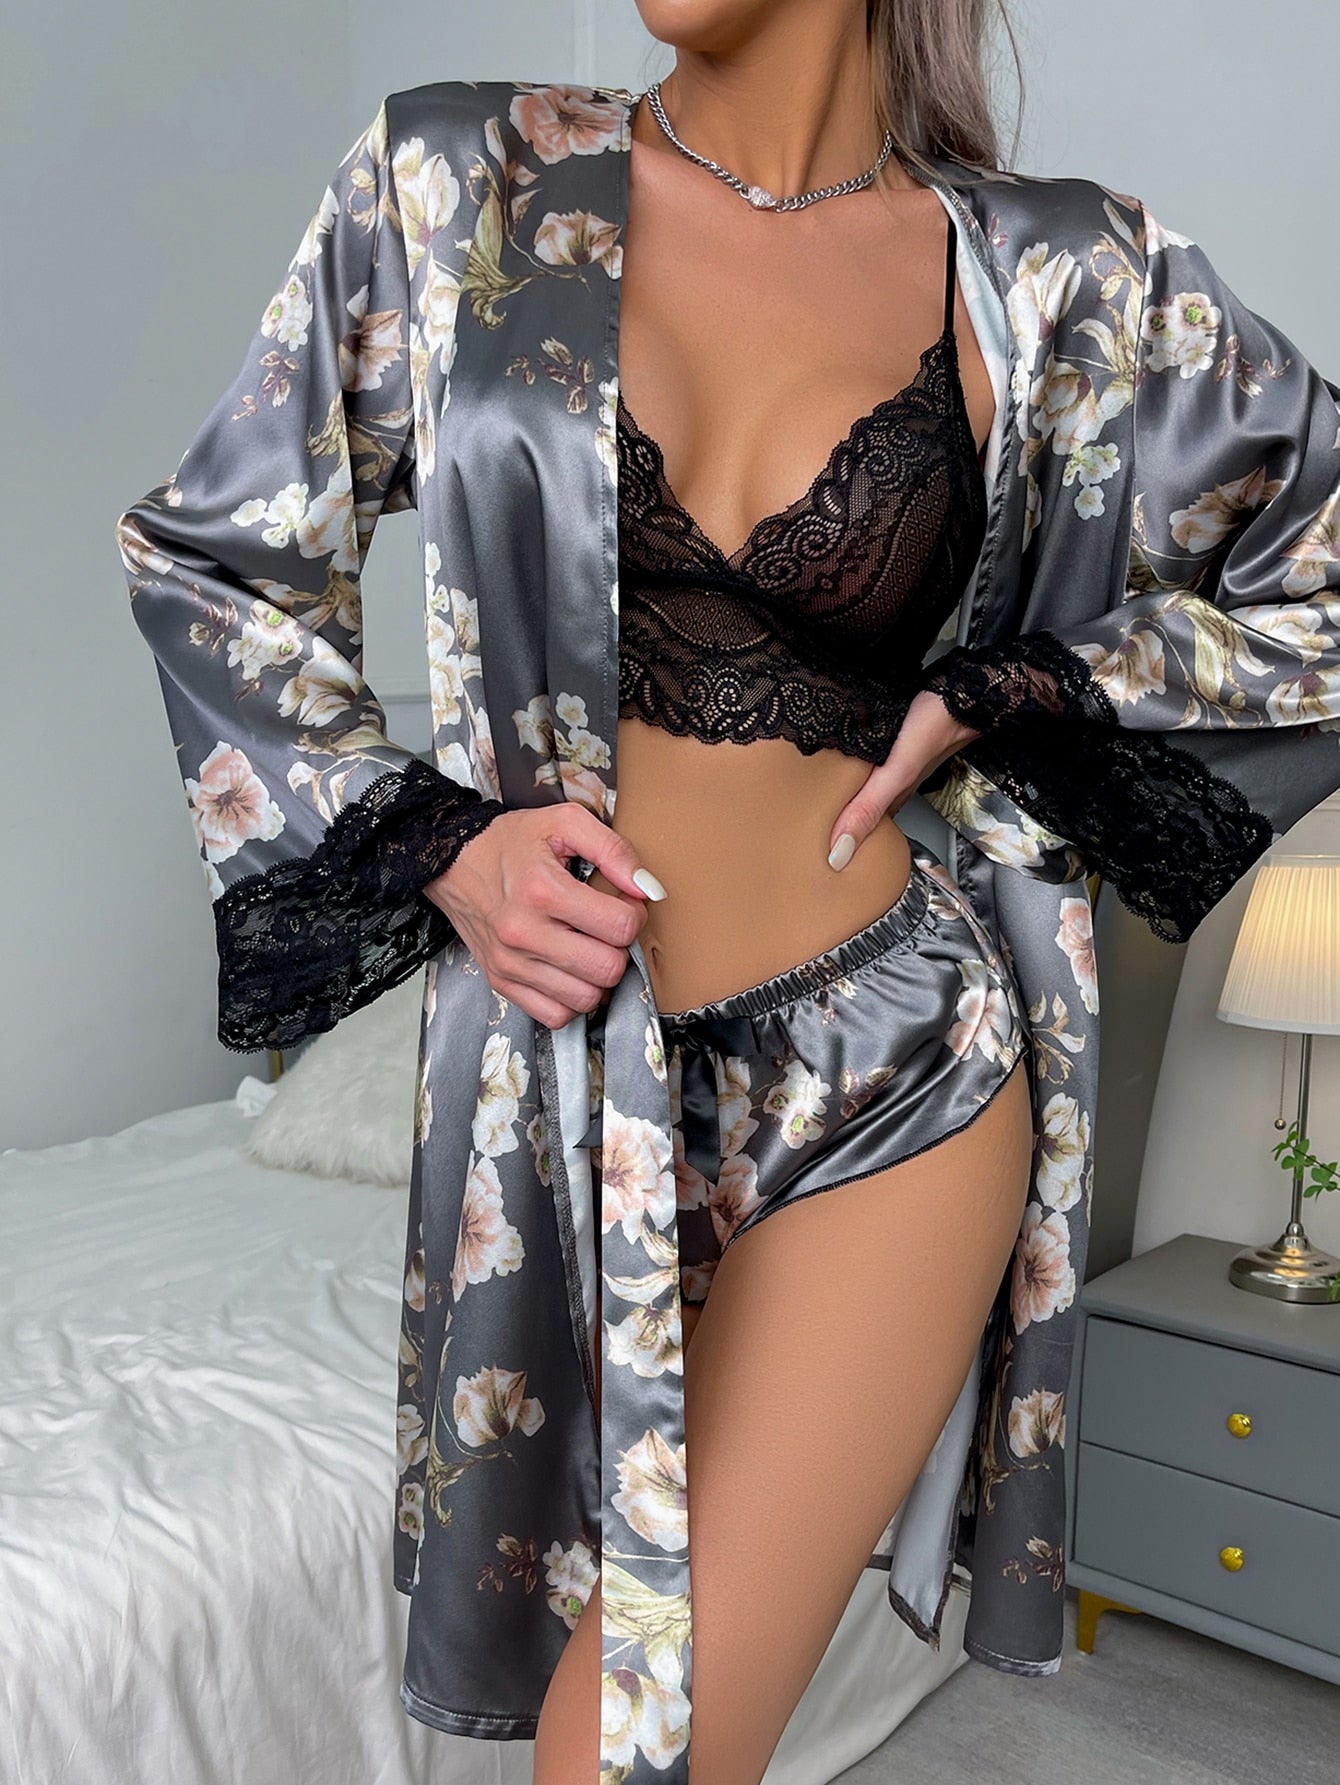 Floral Print Robe with Lace Trim